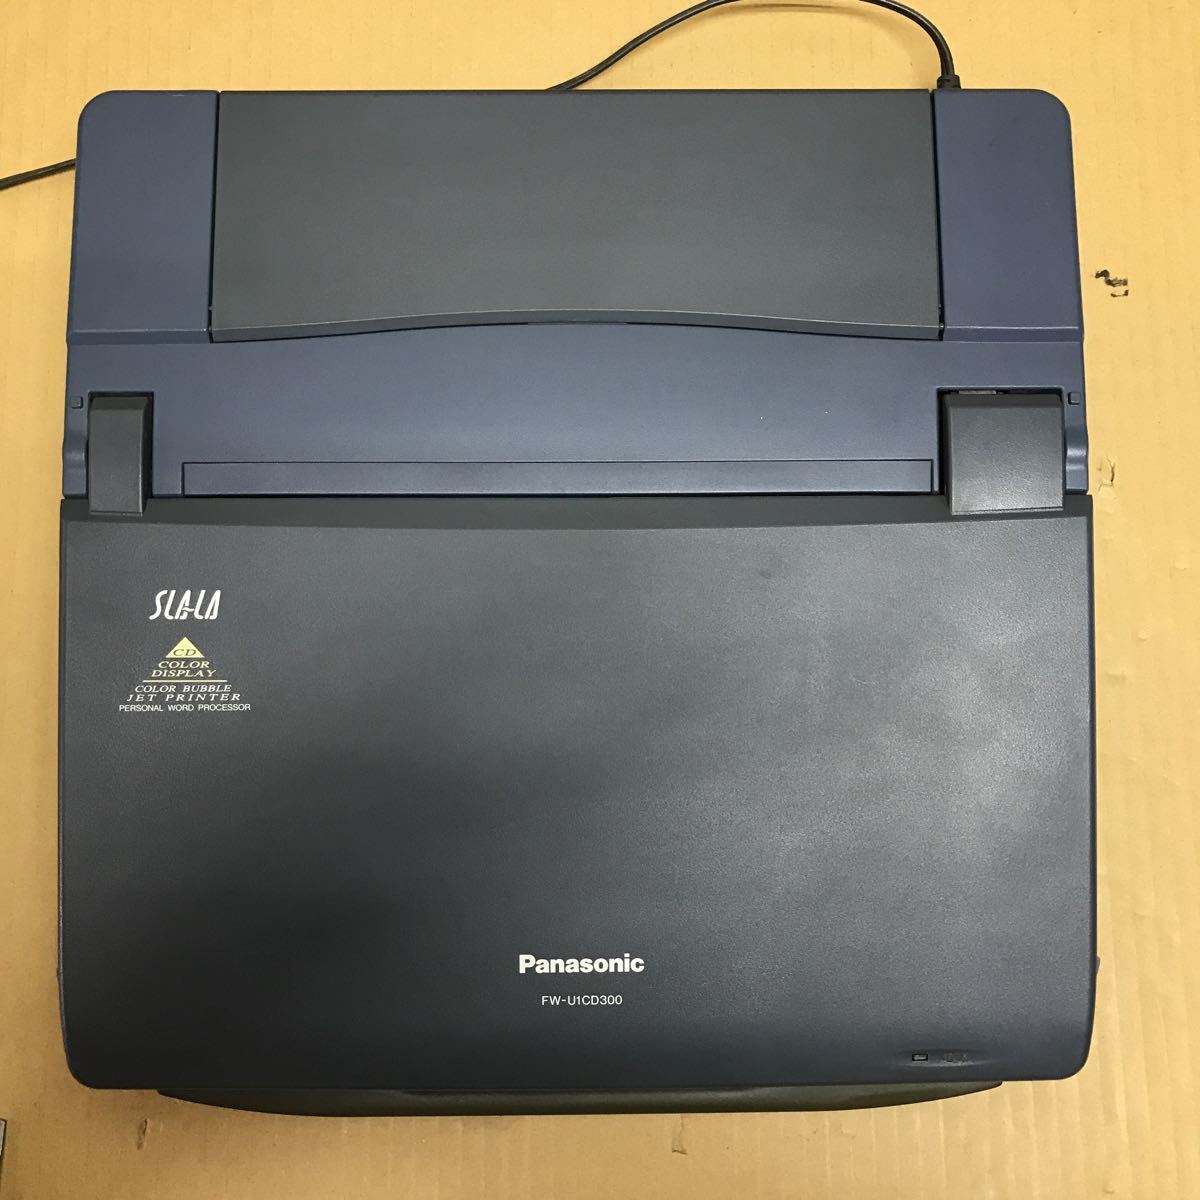 K1940 Panasonic word-processor FW-U1CD300 service being completed 3 months guarantee equipped 